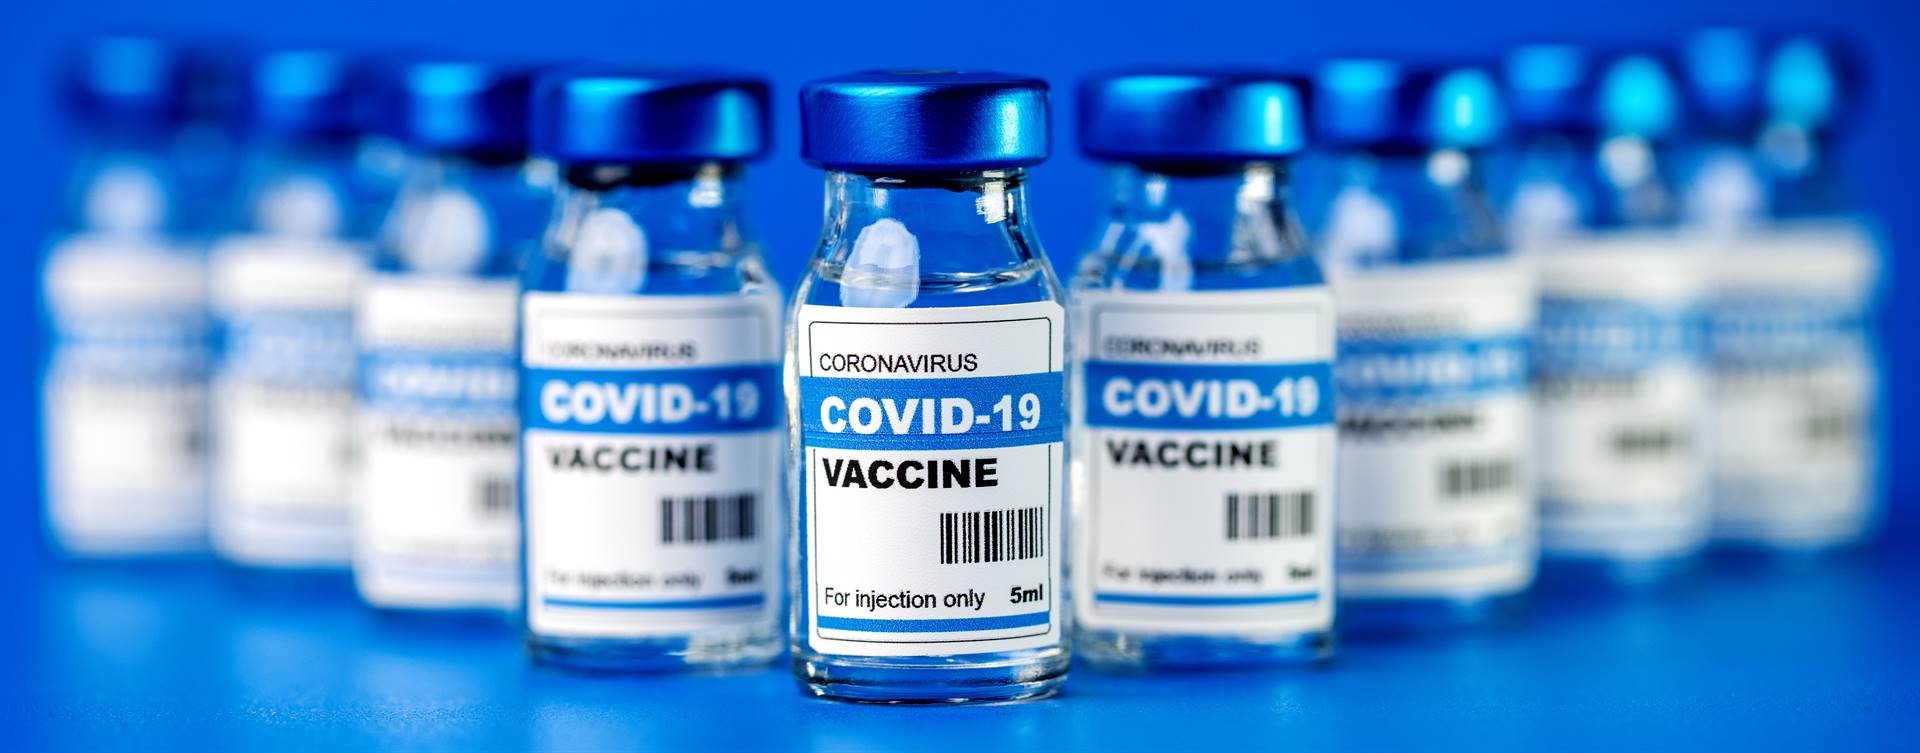 It is crucial that people understand the need to take the vaccine. Picture: iStock